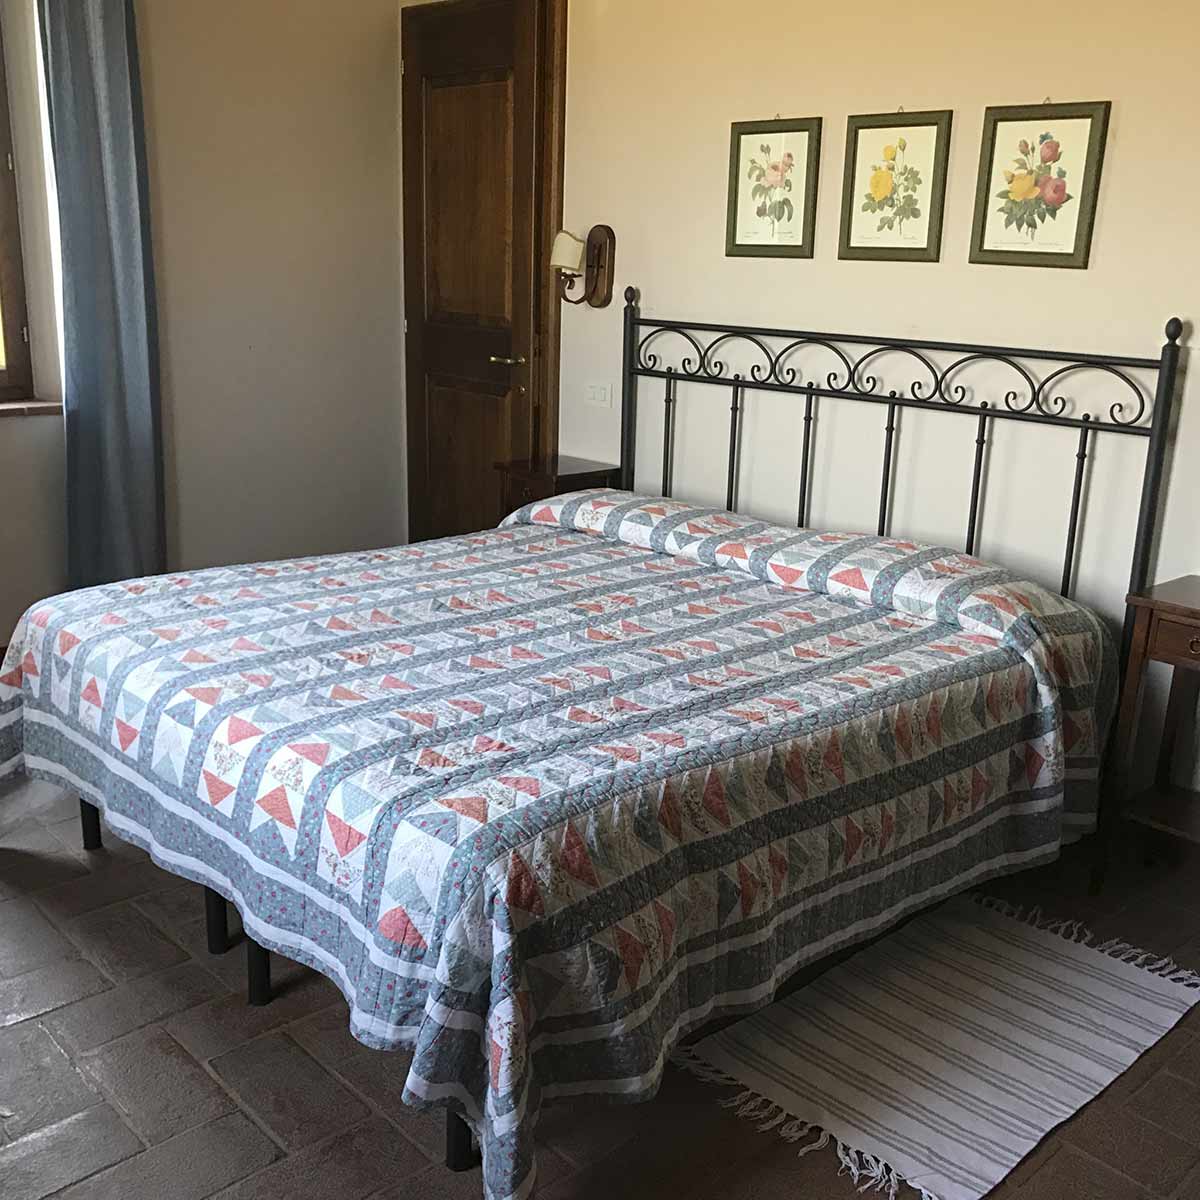 Second bedroom La Loggia: large beds and spacious rooms for tuscany villas for rent